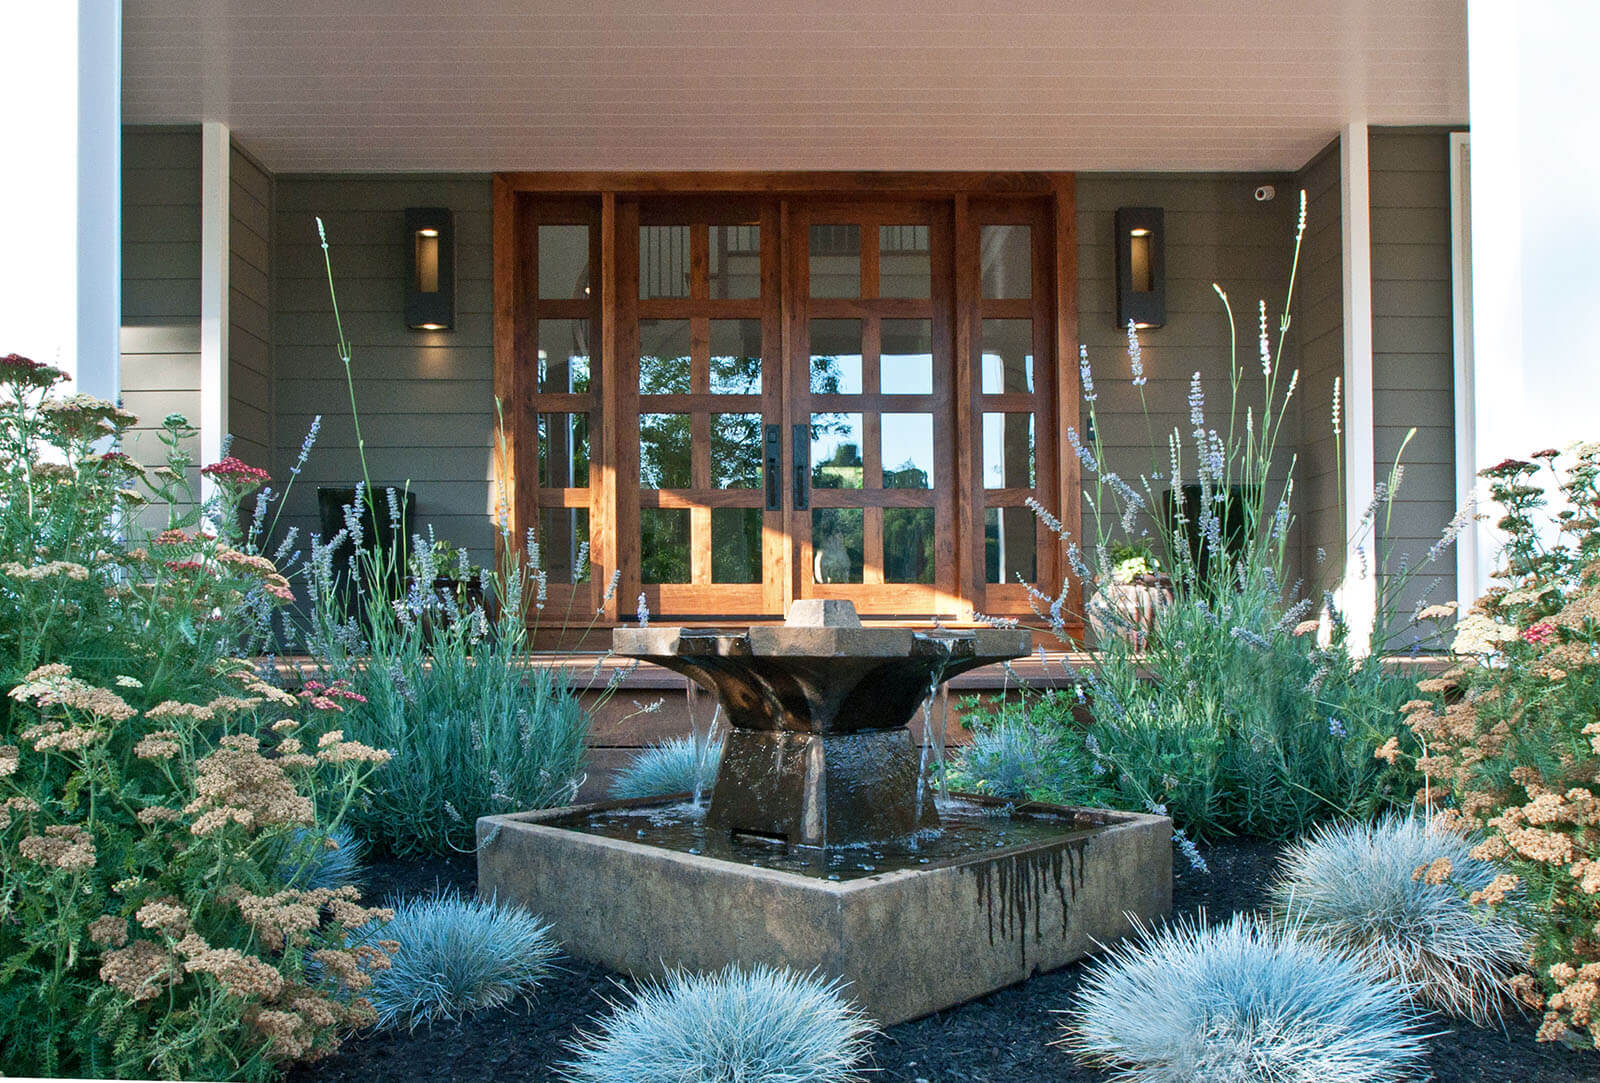 Centerpiece fountain with blue, green, and white grasses and flowers in front of glass ranch doors